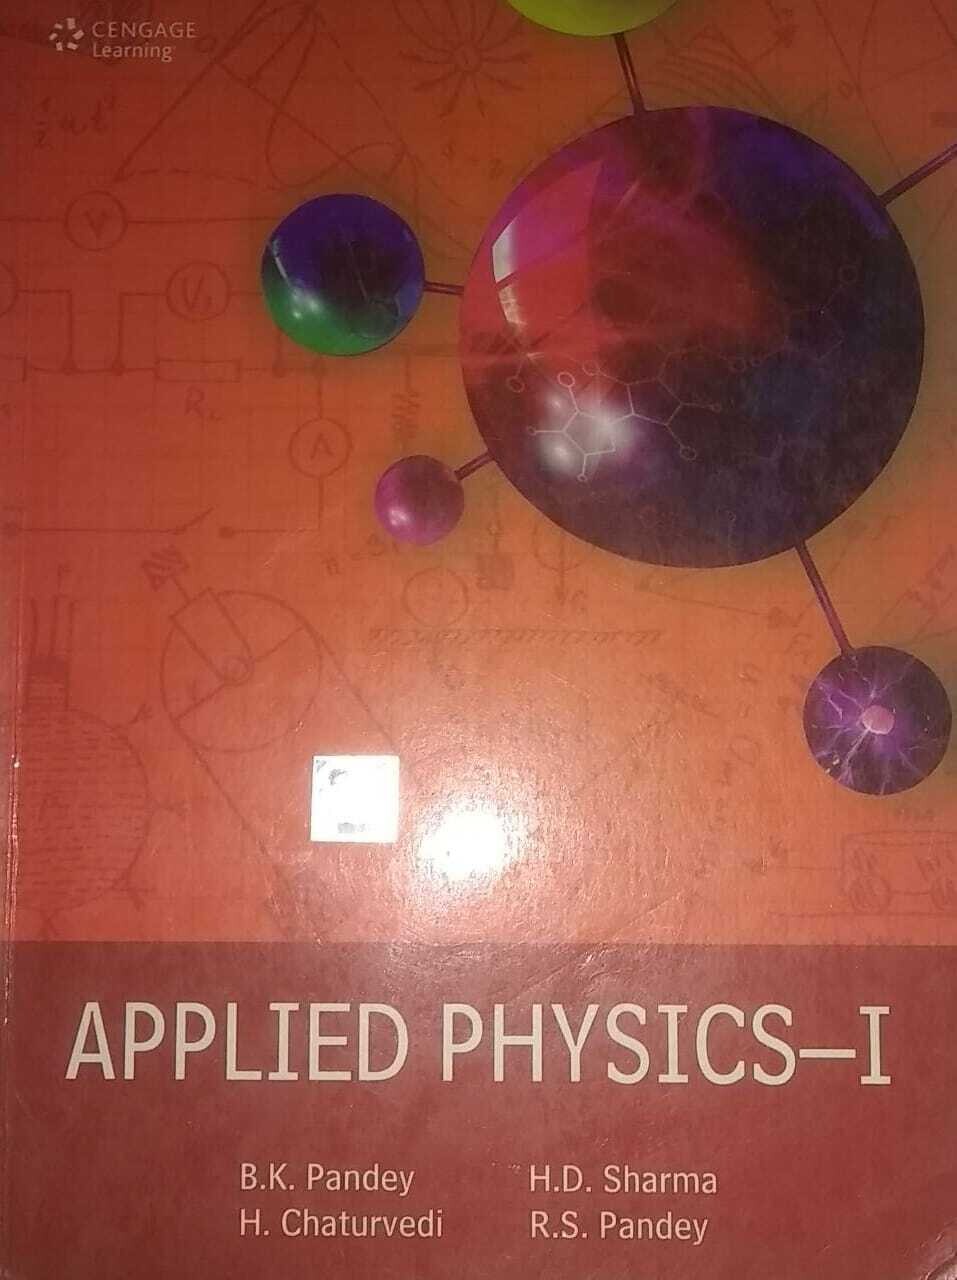 Applied Physics-1 by B K Pandey and H D Sharma and H Chaturvedi and R S Pandey